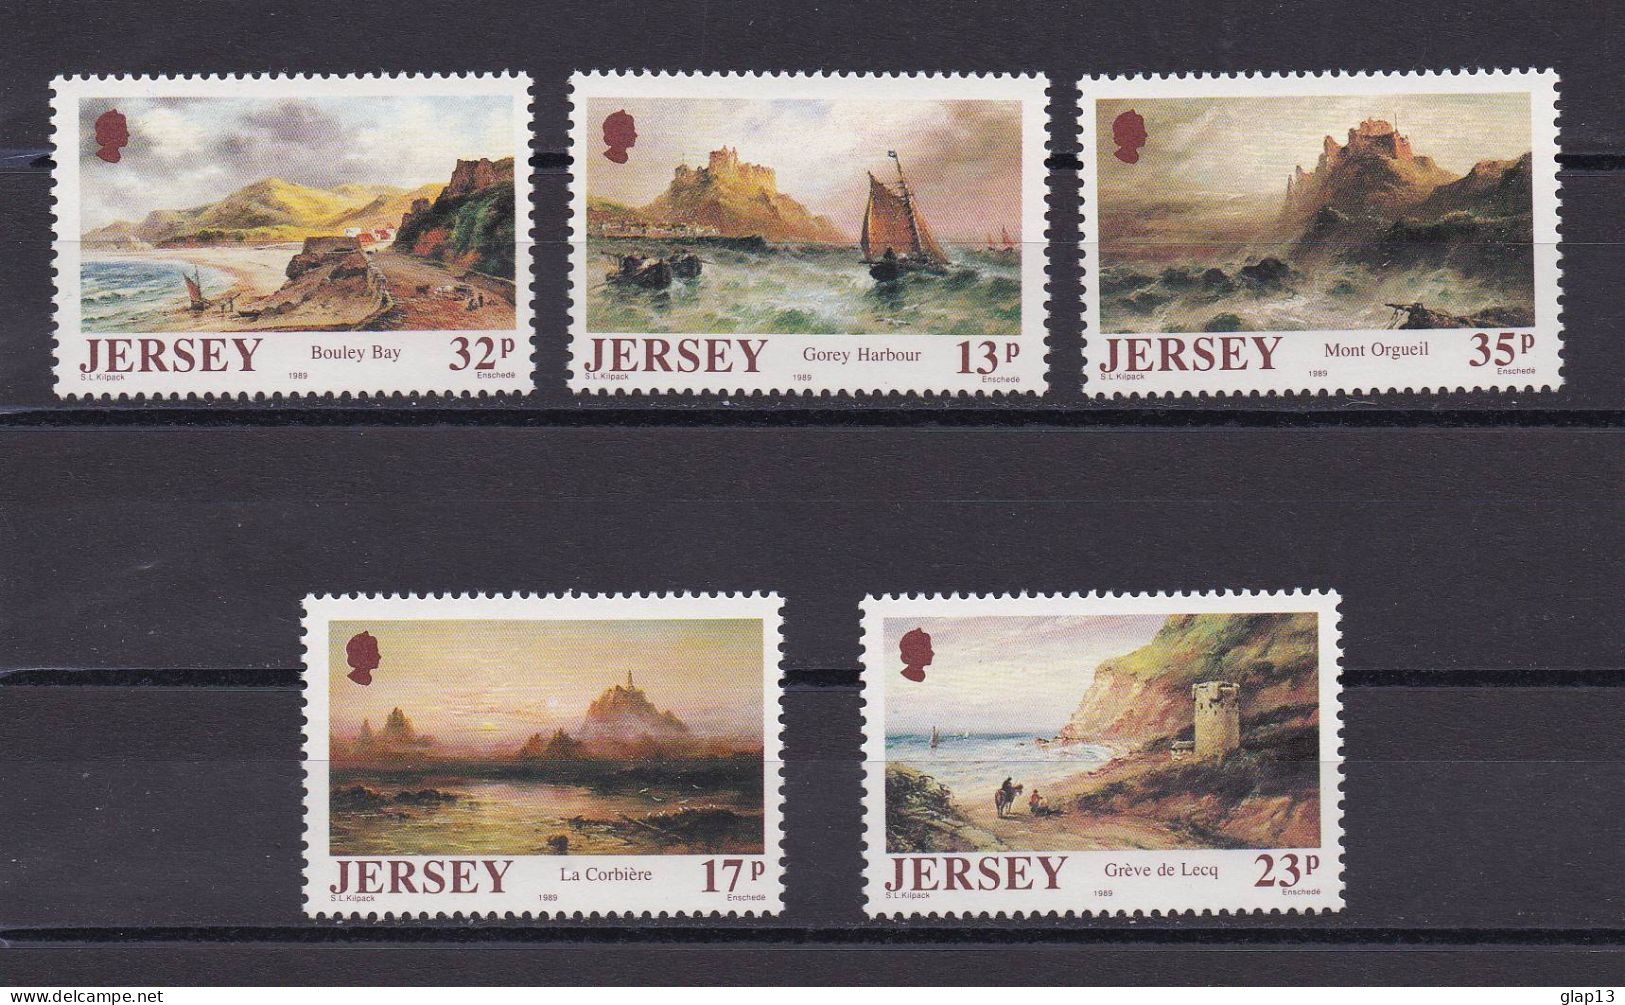 JERSEY 1989 TIMBRE N°490/94 NEUF** TABLEAUX - Jersey